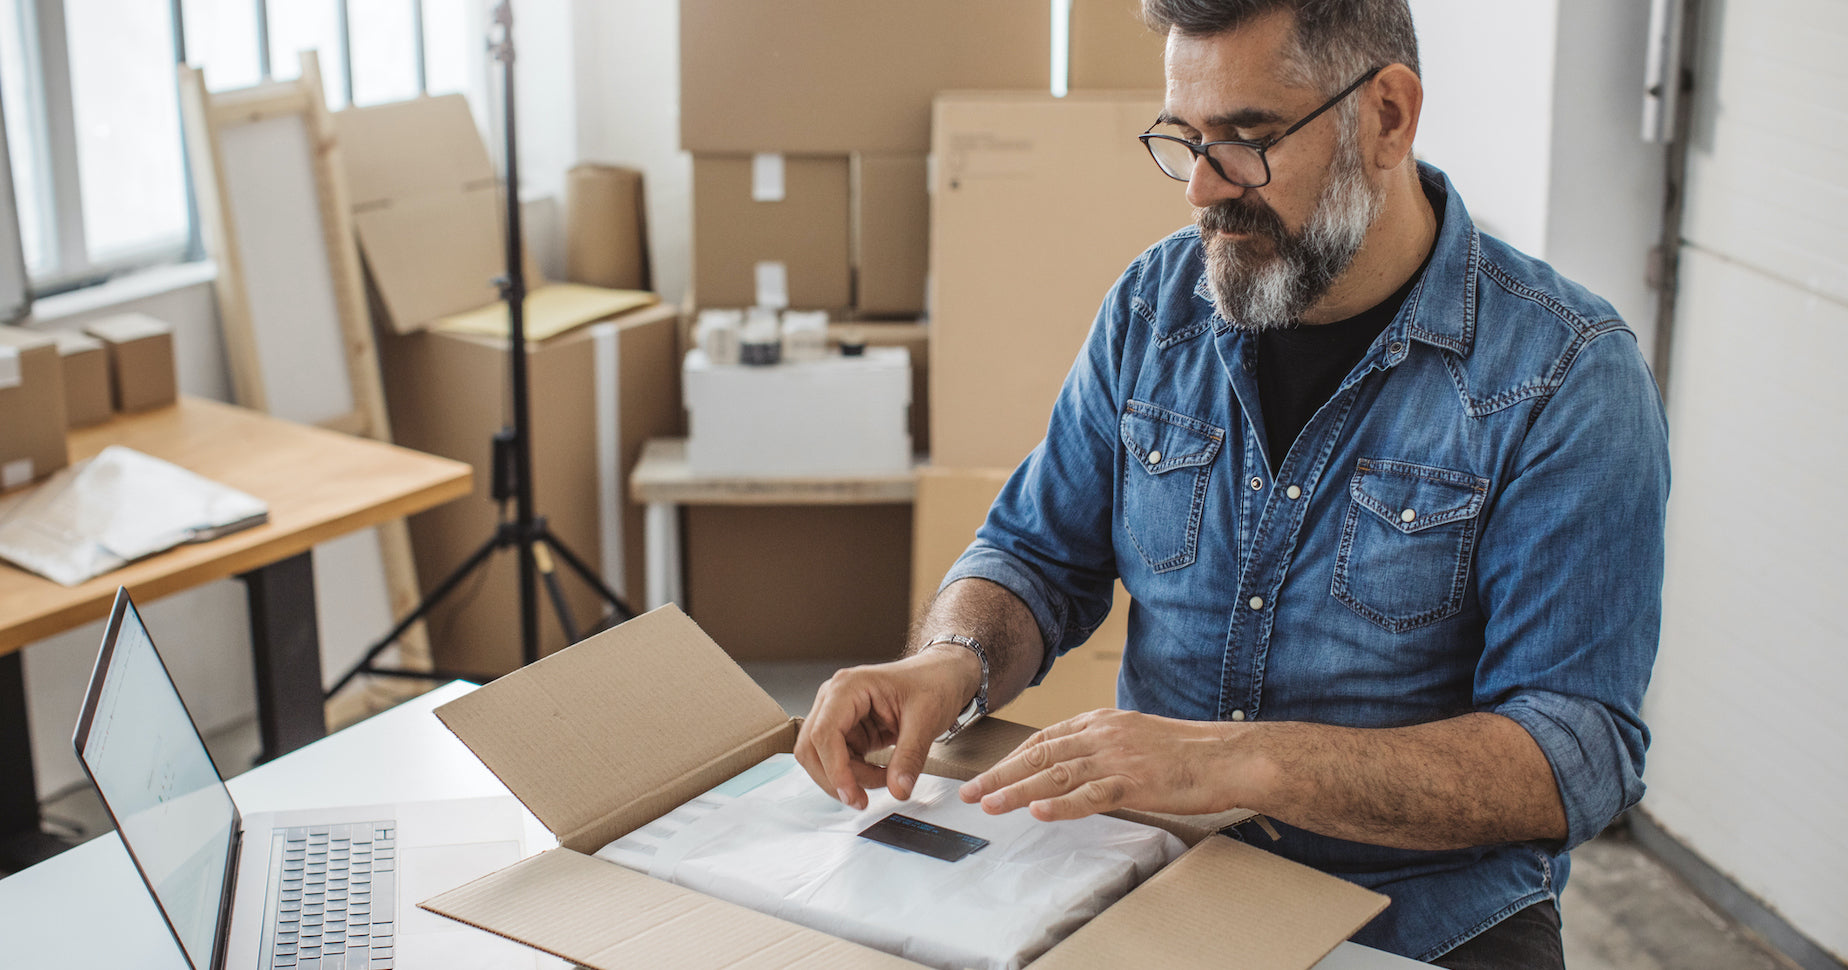 Prepare your business for the holidays and shipping delays